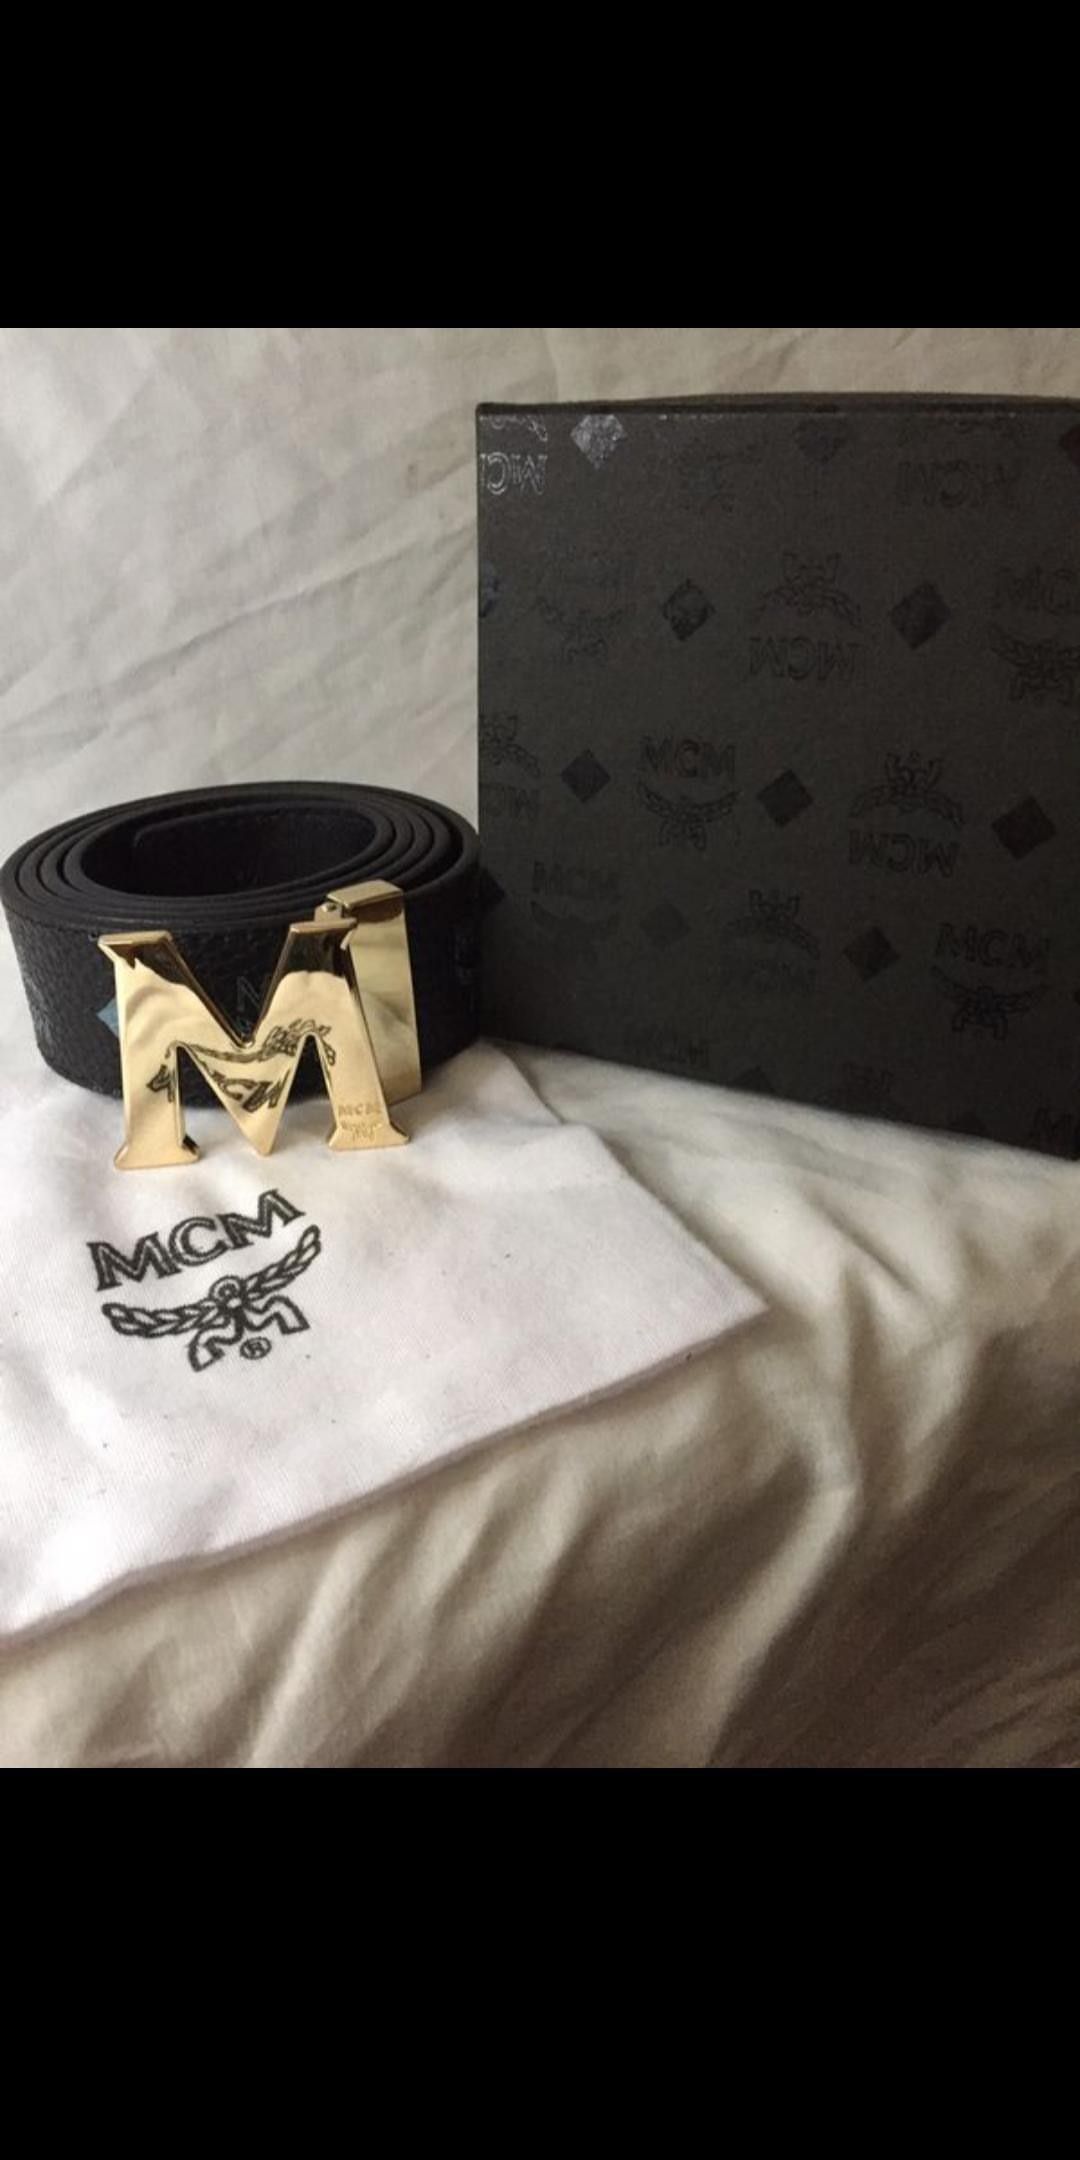 Mcm belt still on the box size 40. New new never used